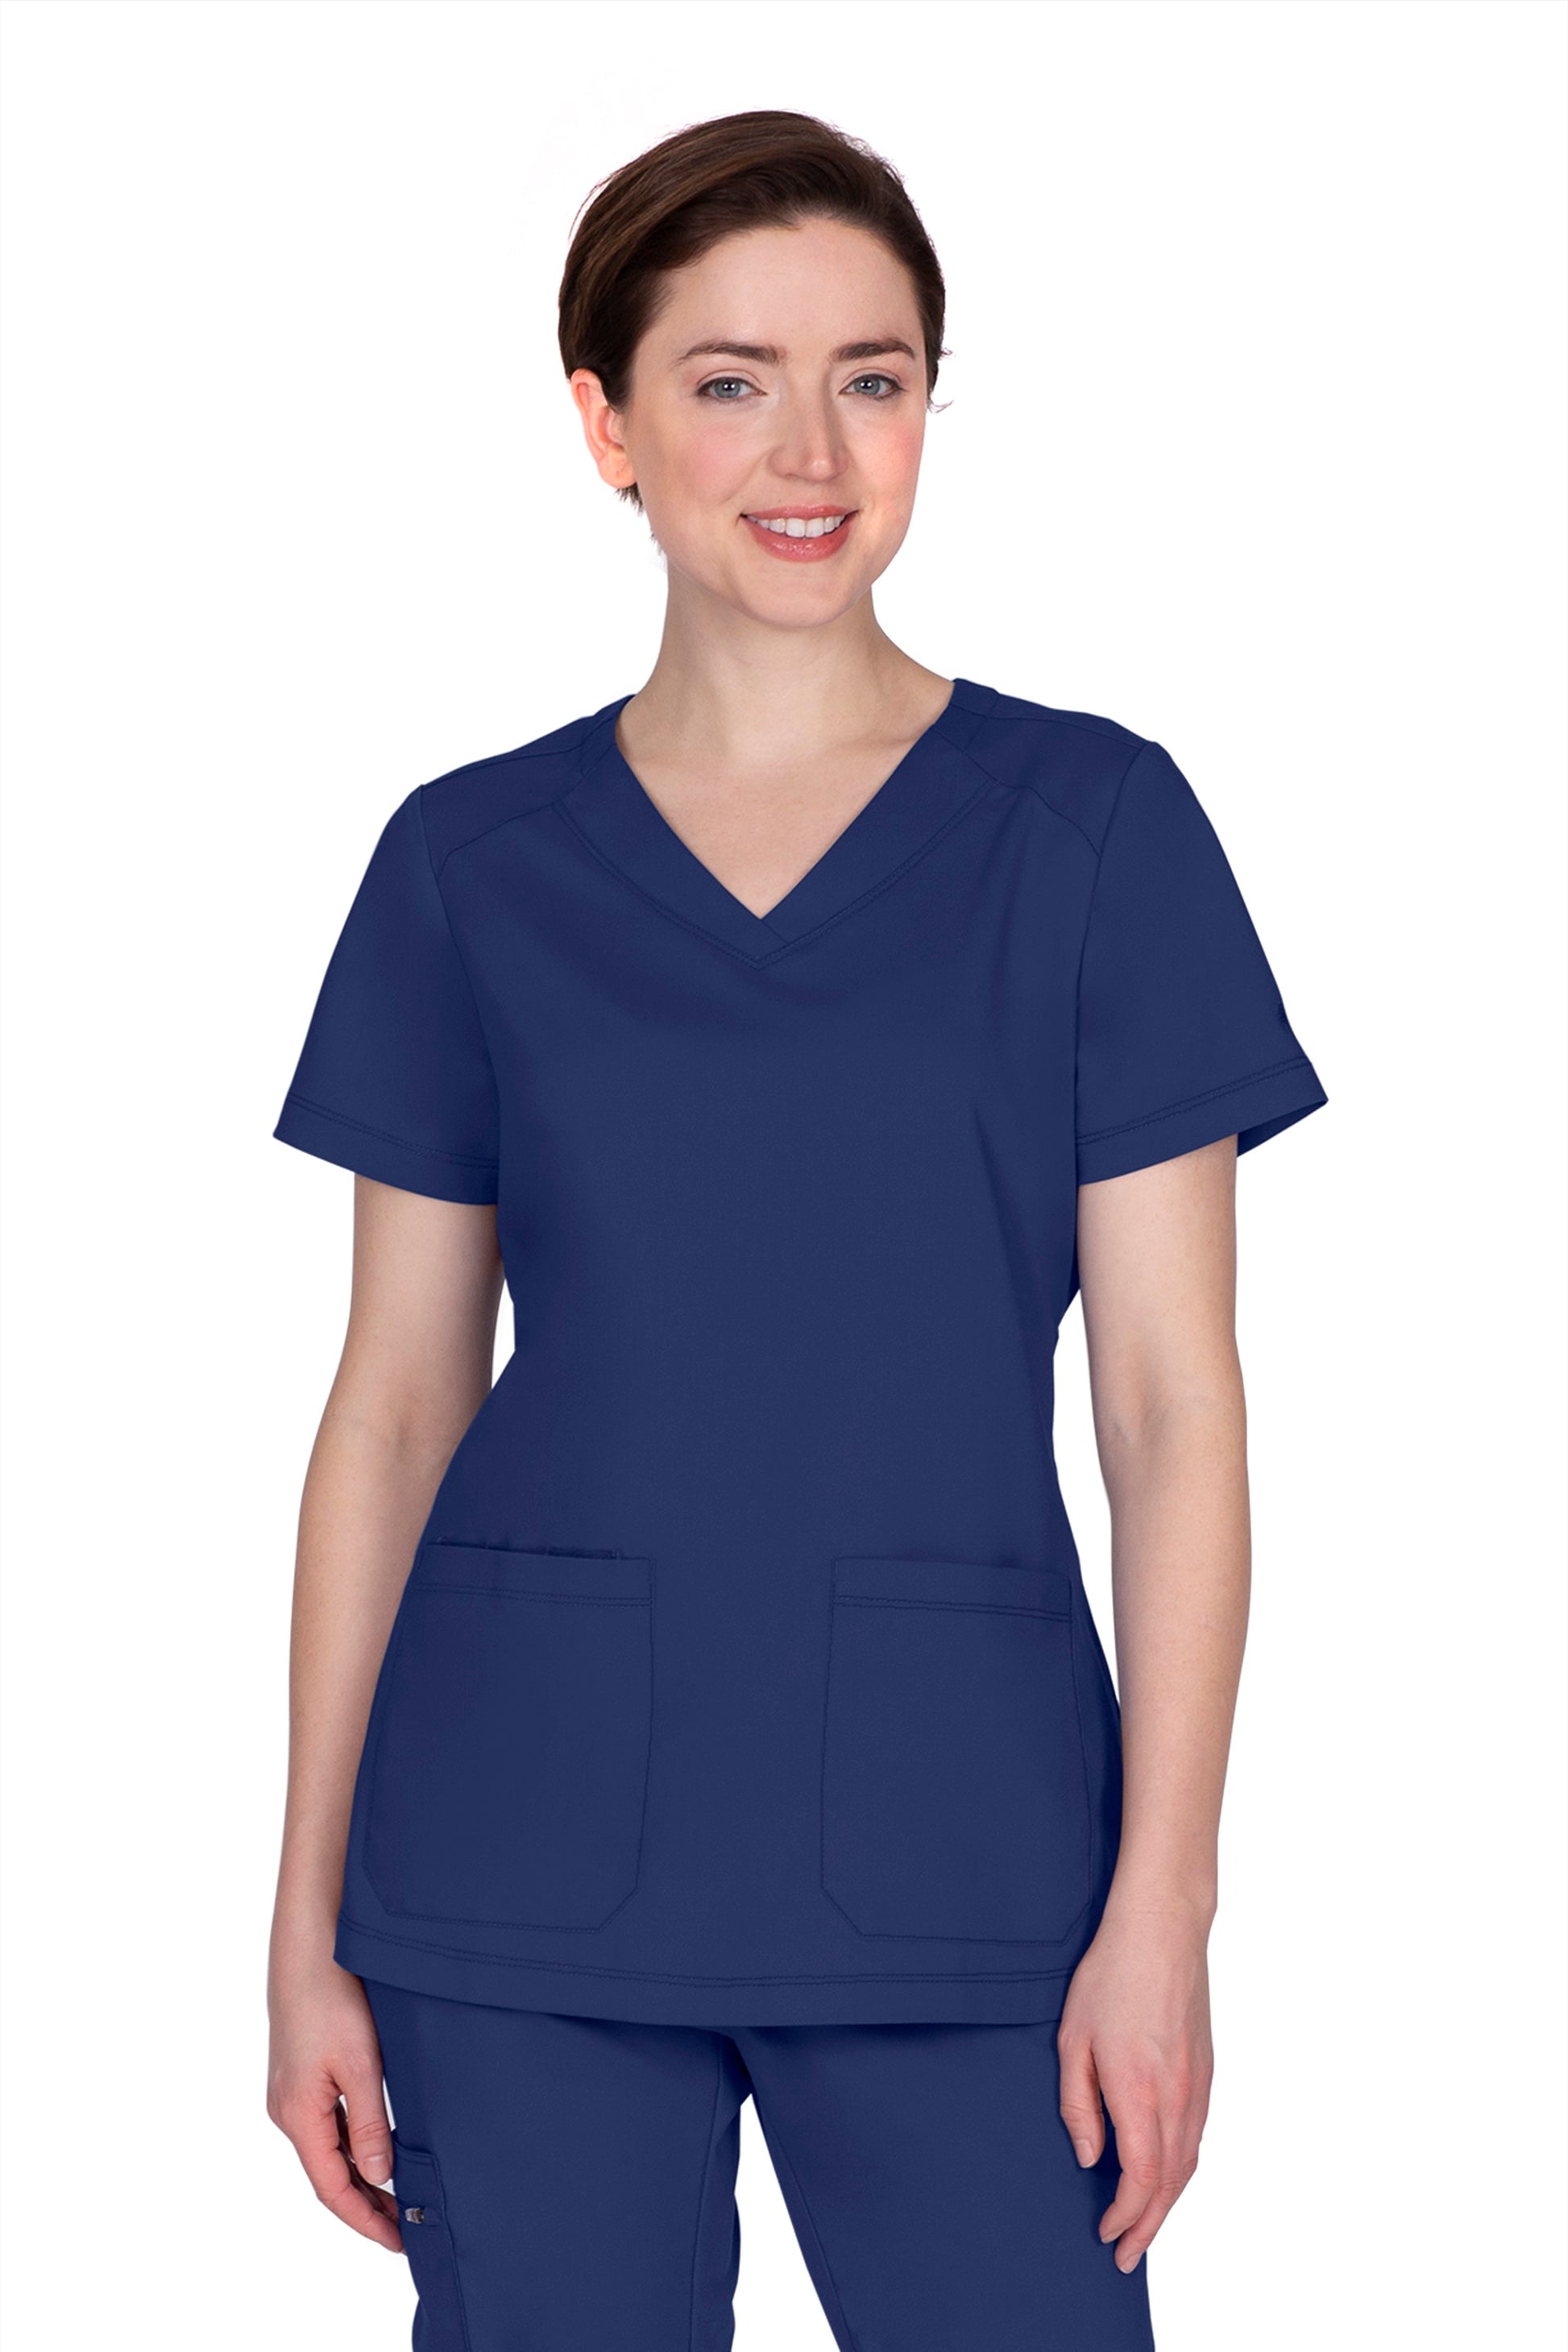 Healing Hands Scrub Top Purple Label Jill in Navy at Parker's Clothing and Shoes.